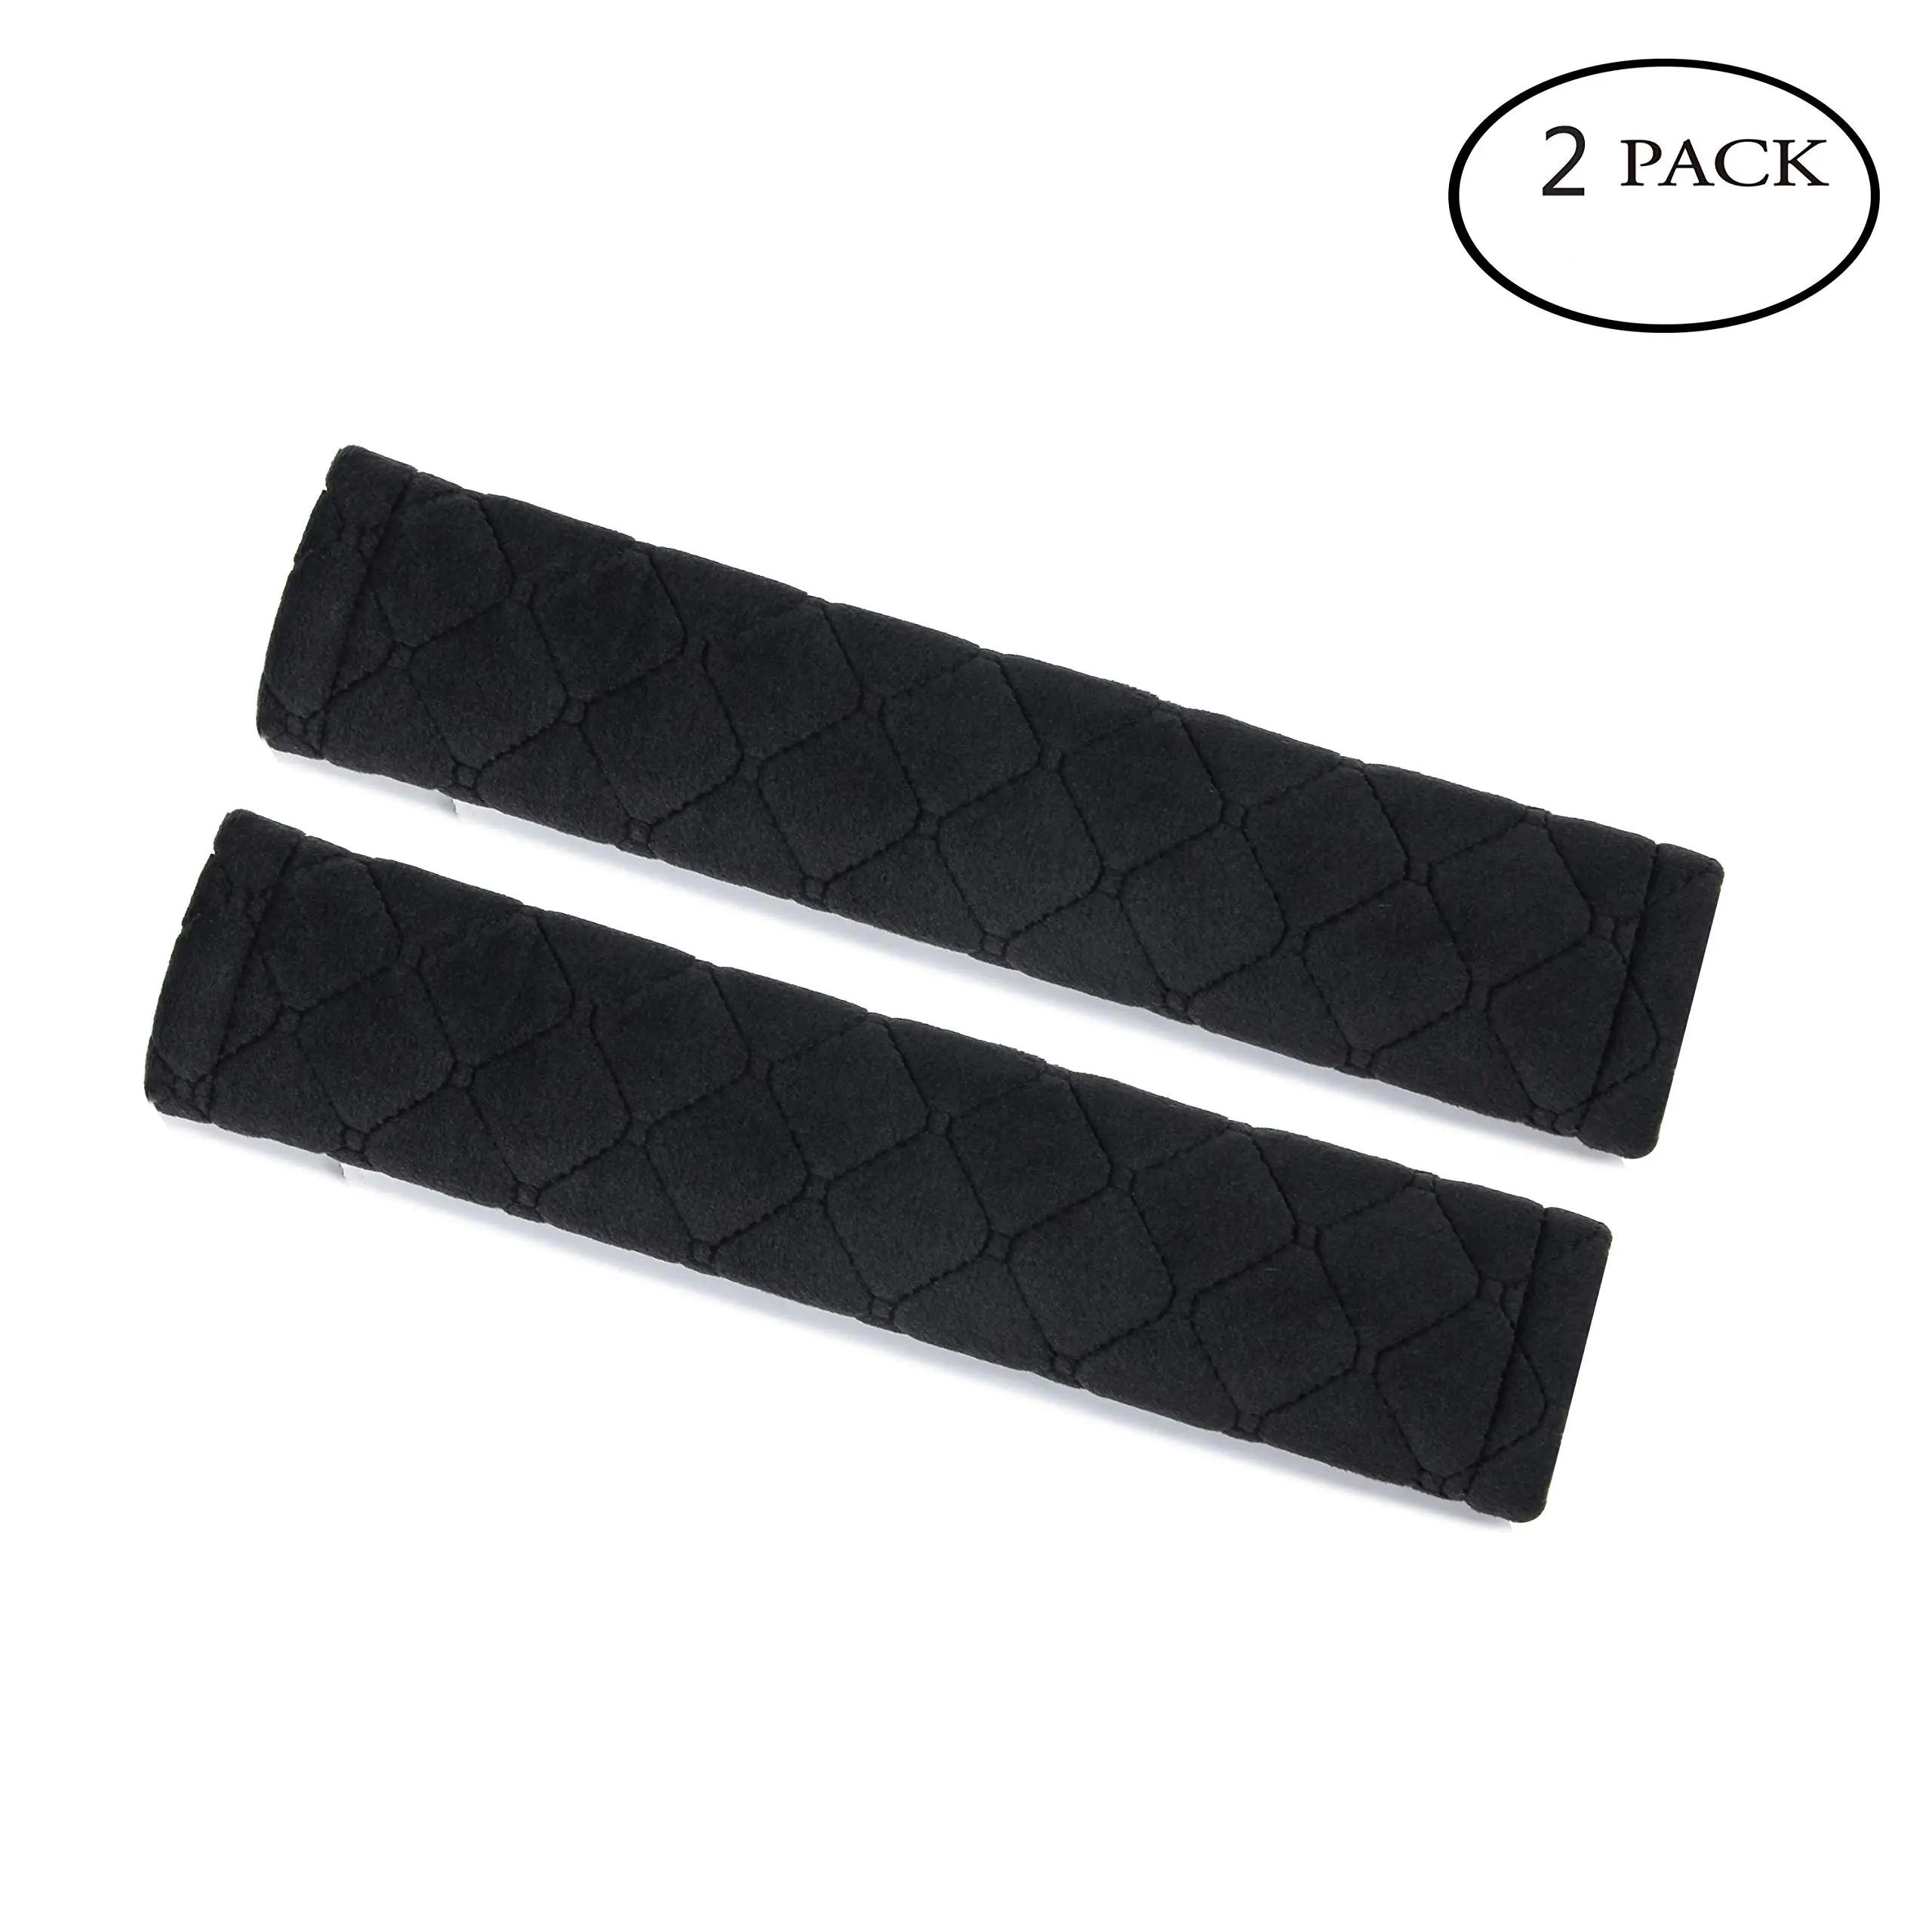 Soft Auto Seat Belt Cover Seatbelt Shoulder Pad 2 PCS for a More Comfortable Driving CompatibleAll Cars and Backpack